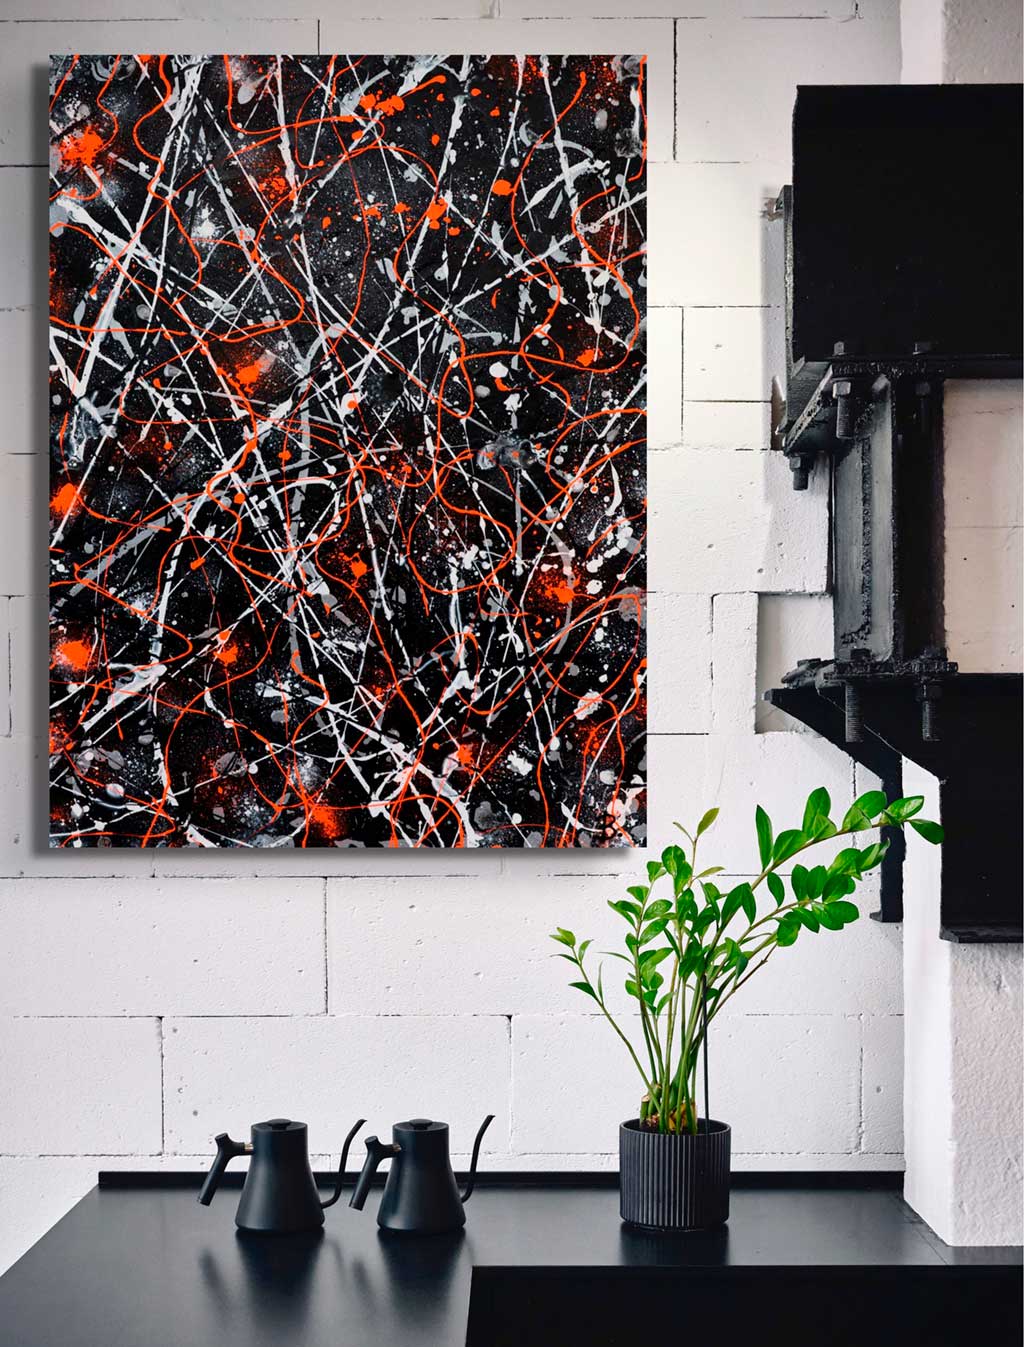 'Lava' original abstract painting on canvas seen hanging in modern kitchen. Painted by Bridget Bradley. A bold, textural  abstract.